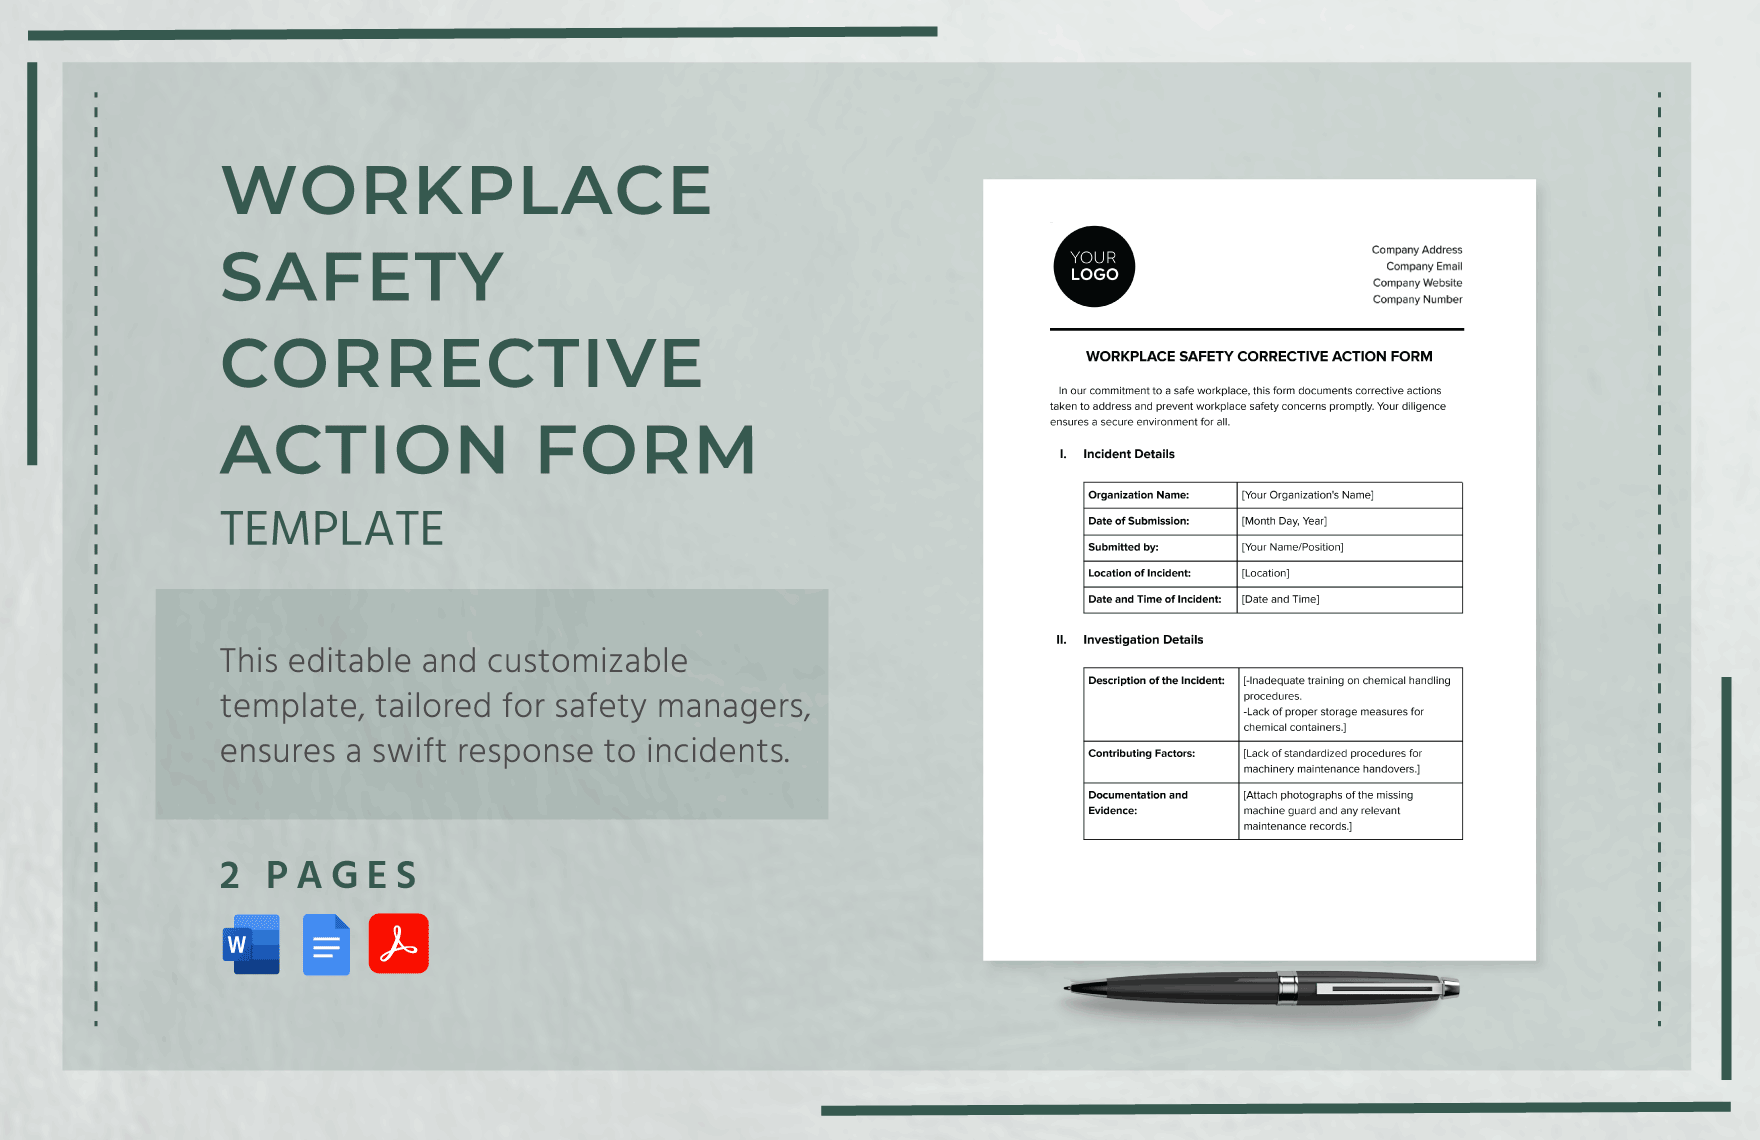 Workplace Safety Corrective Action Form Template in Word, Google Docs, PDF